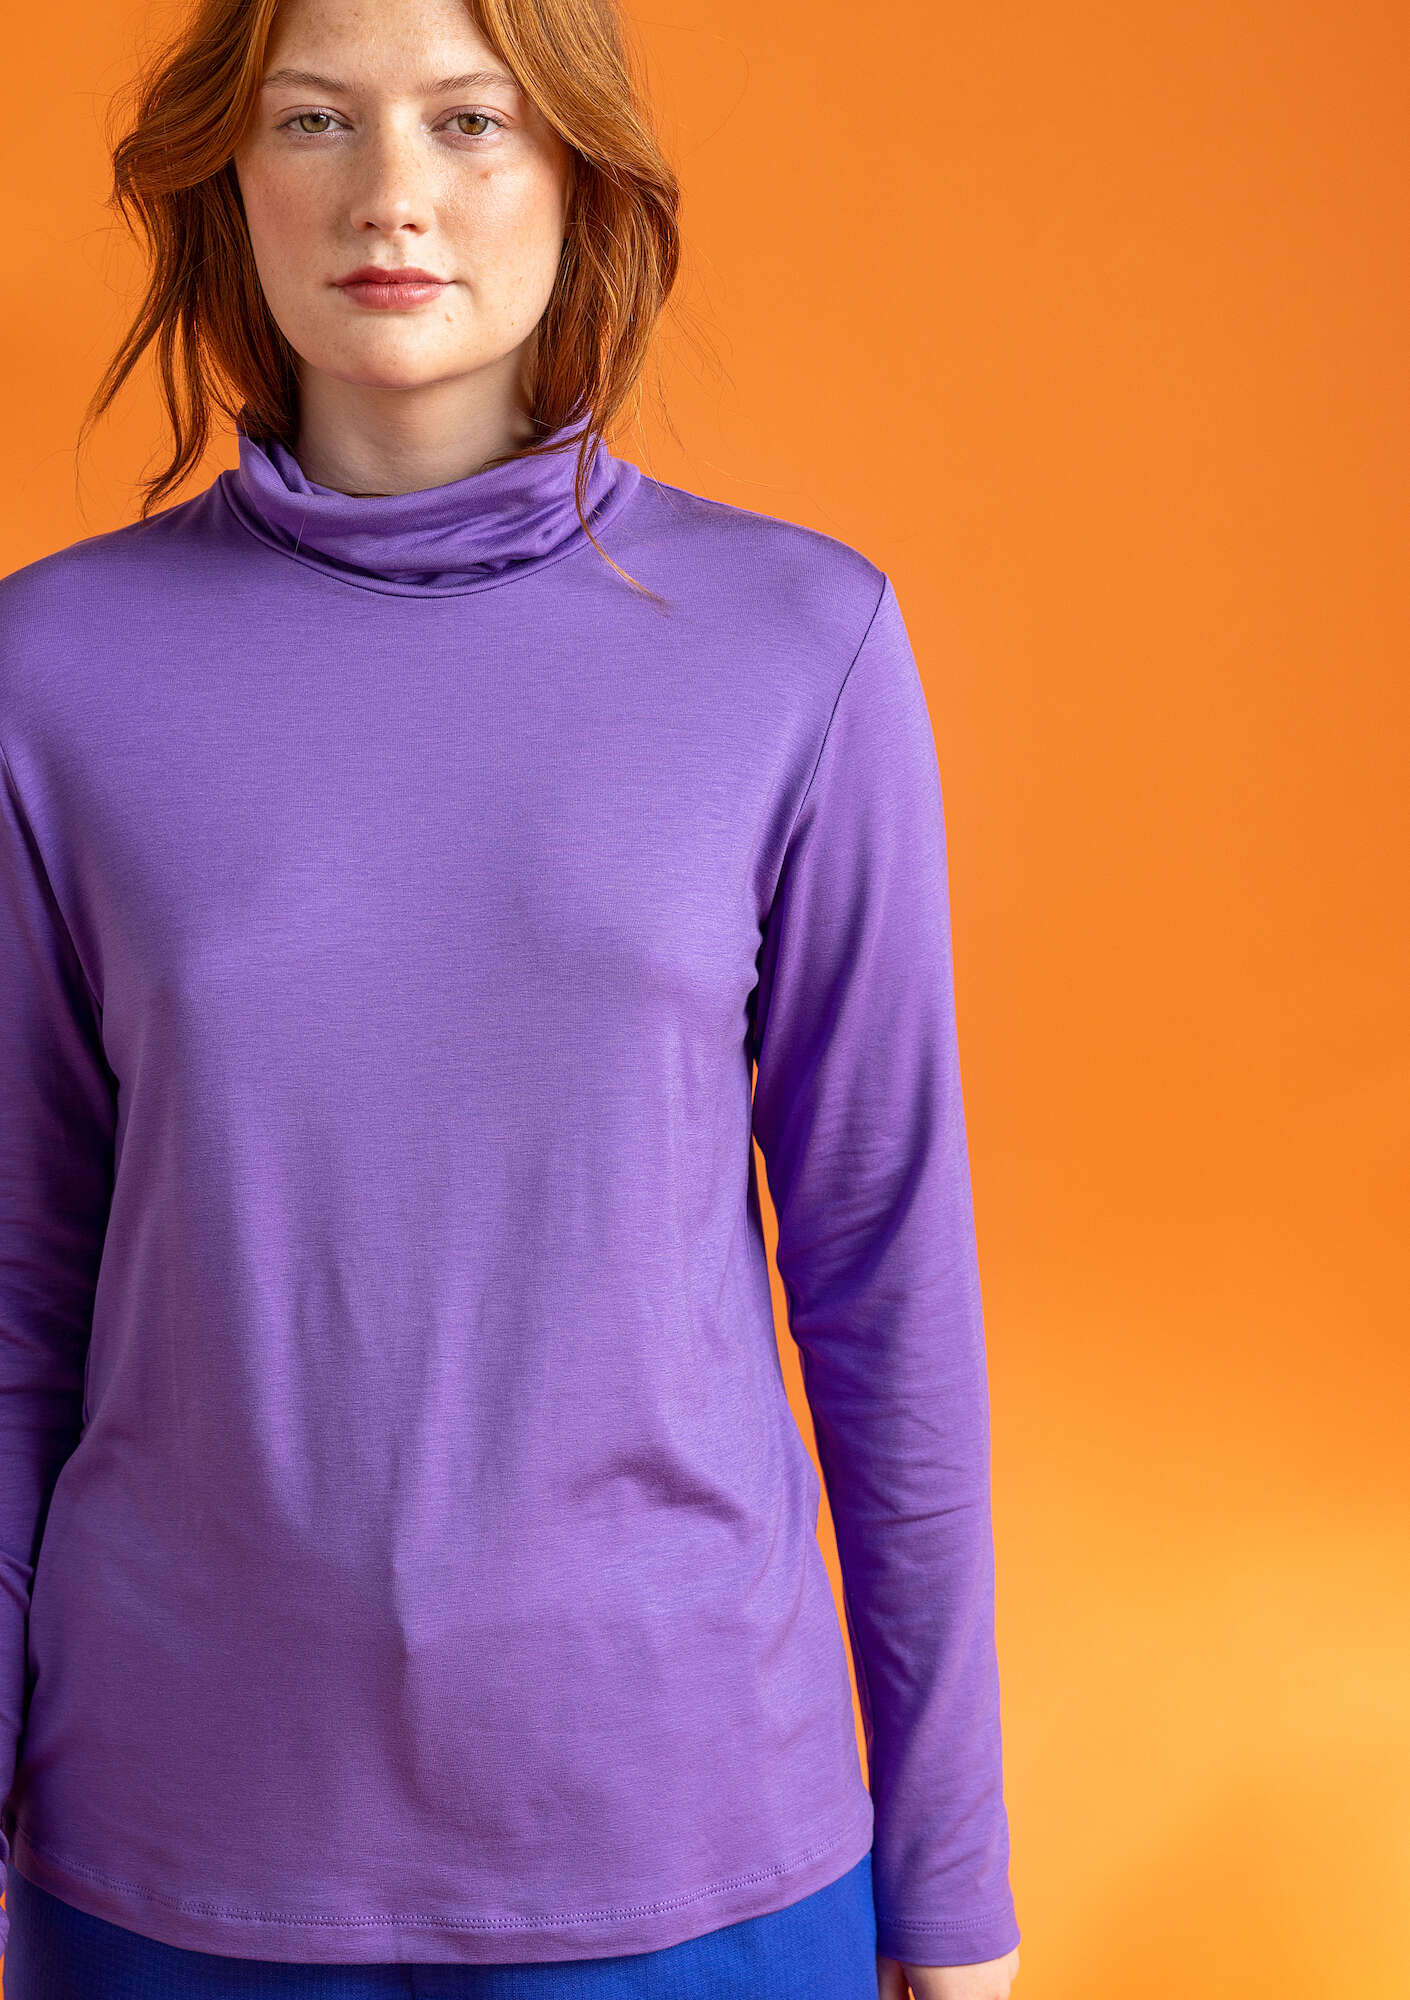 Jersey polo-neck top wild pansy